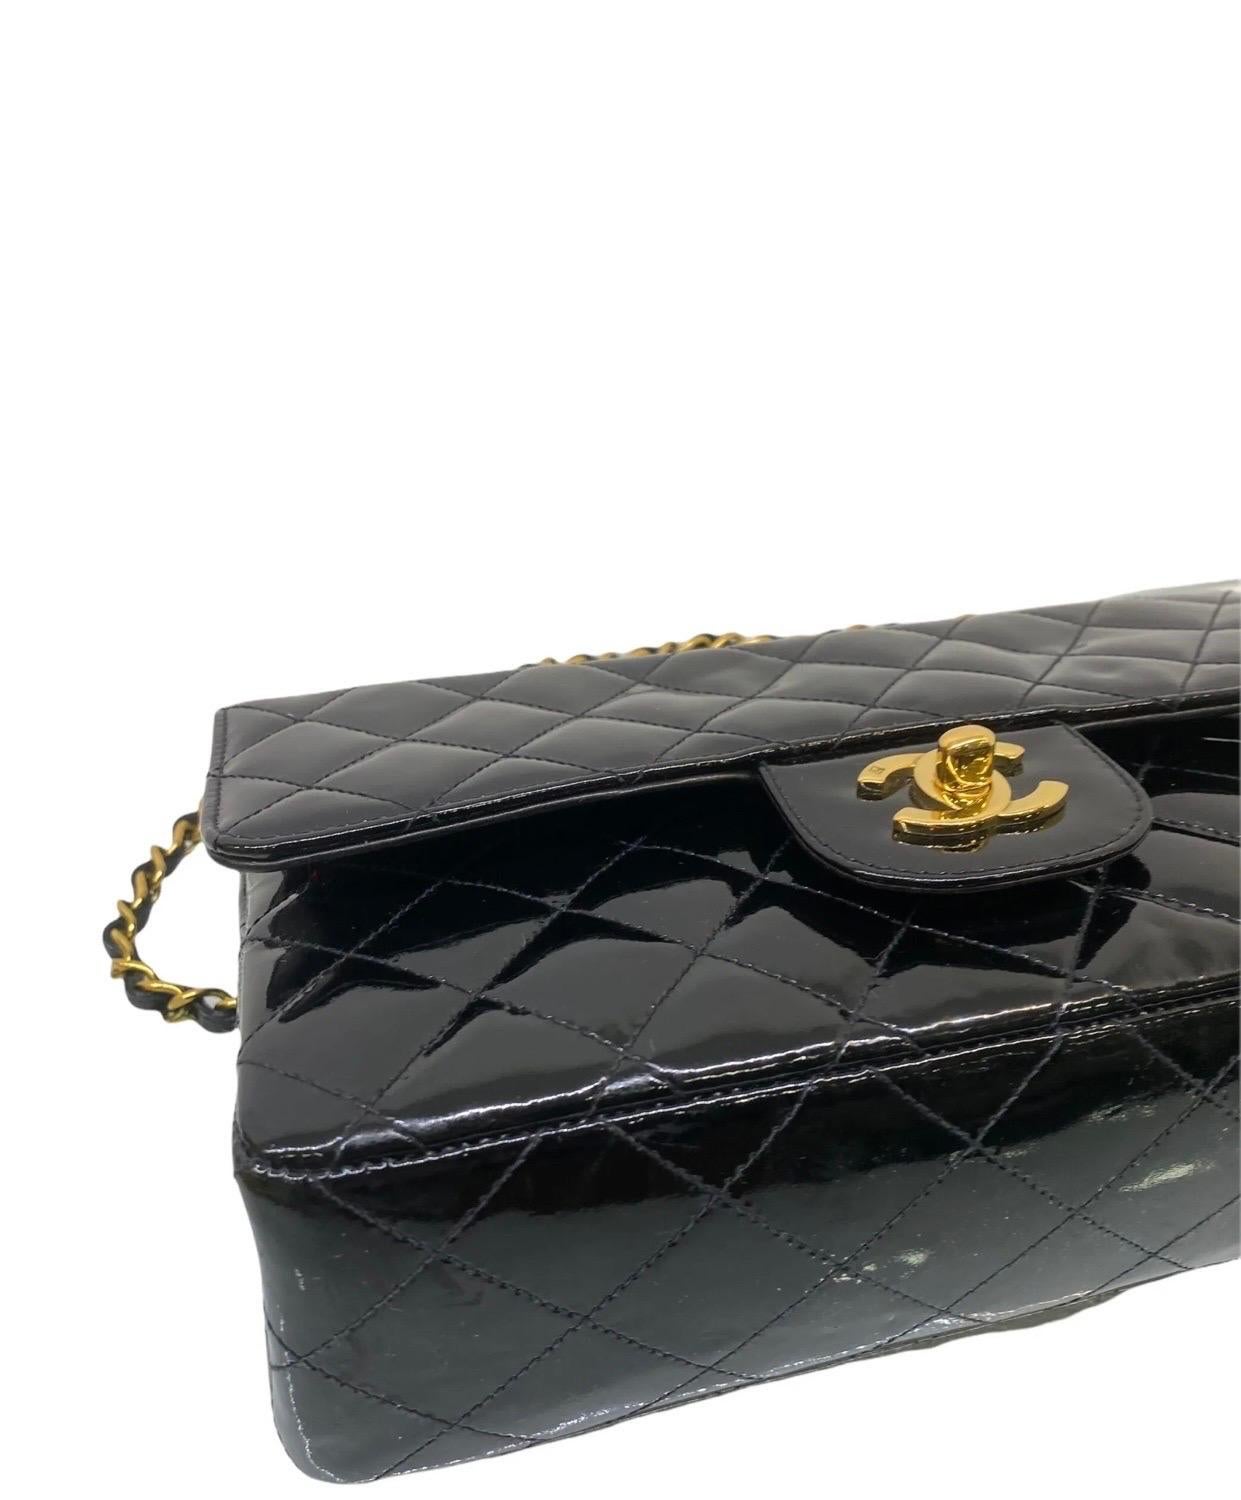 Chanel 2.55 Black Patent Leather 90’ 1